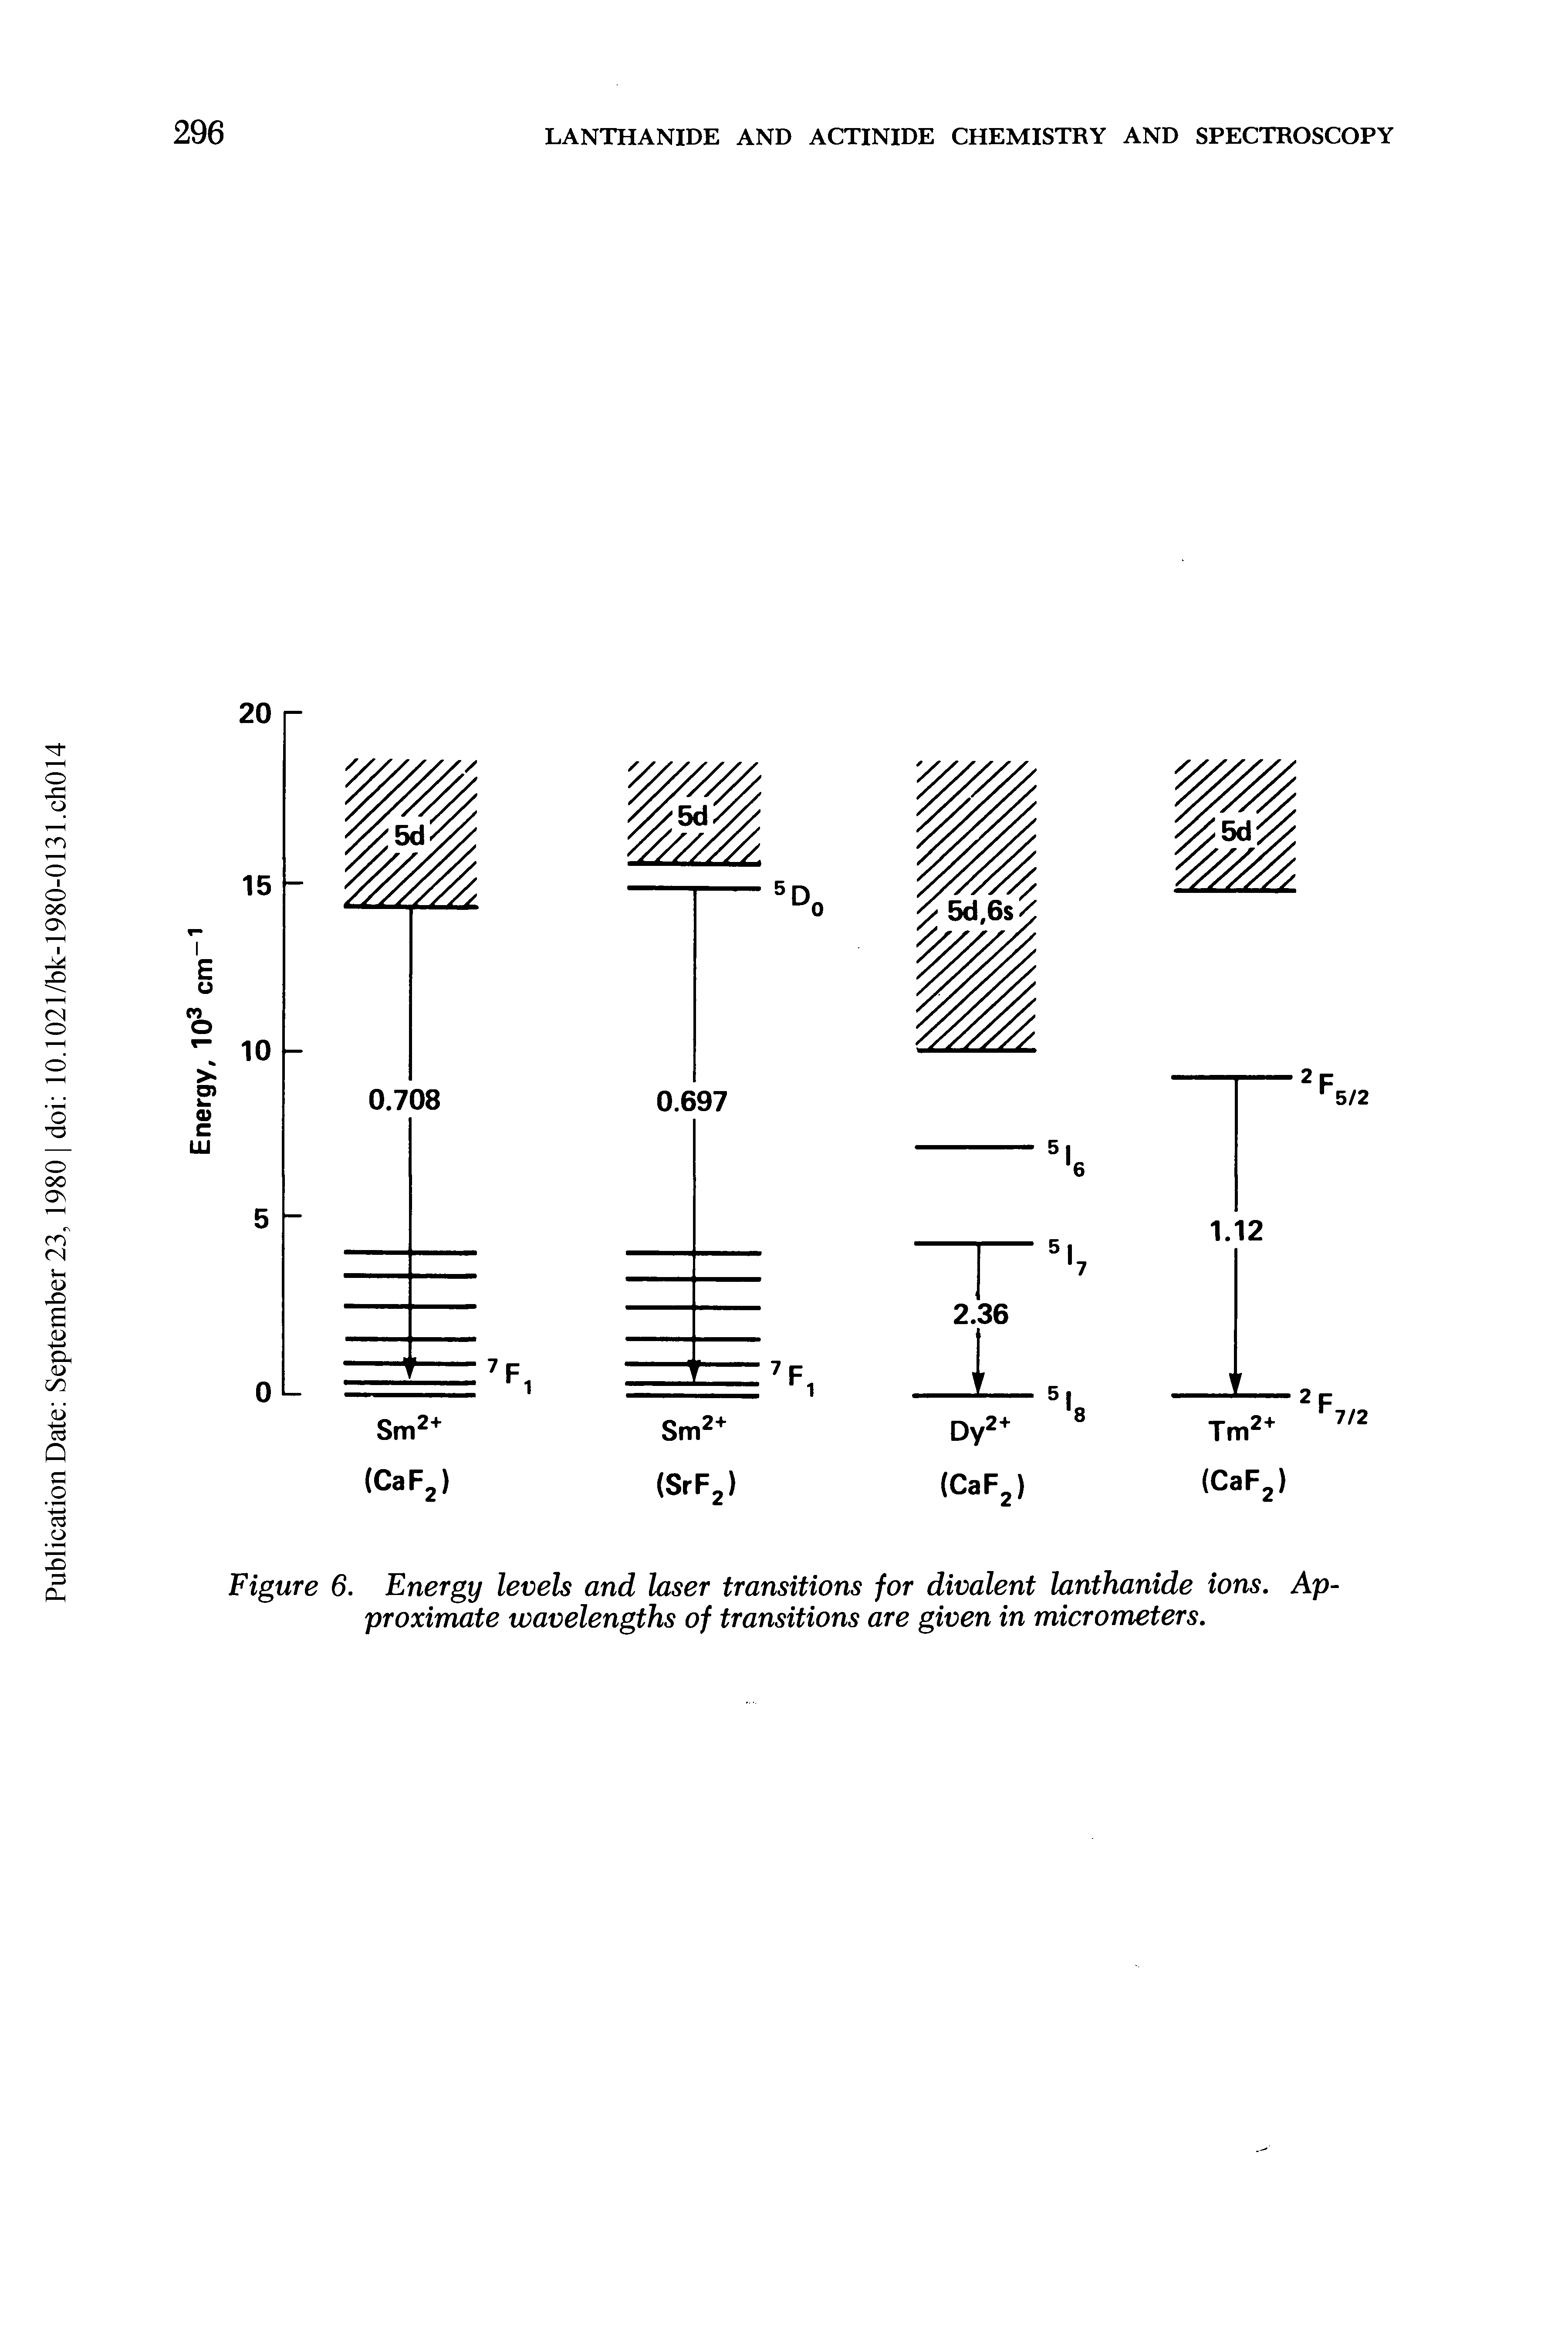 Figure 6. Energy levels and laser transitions for divalent lanthanide ions. Approximate wavelengths of transitions are given in micrometers.